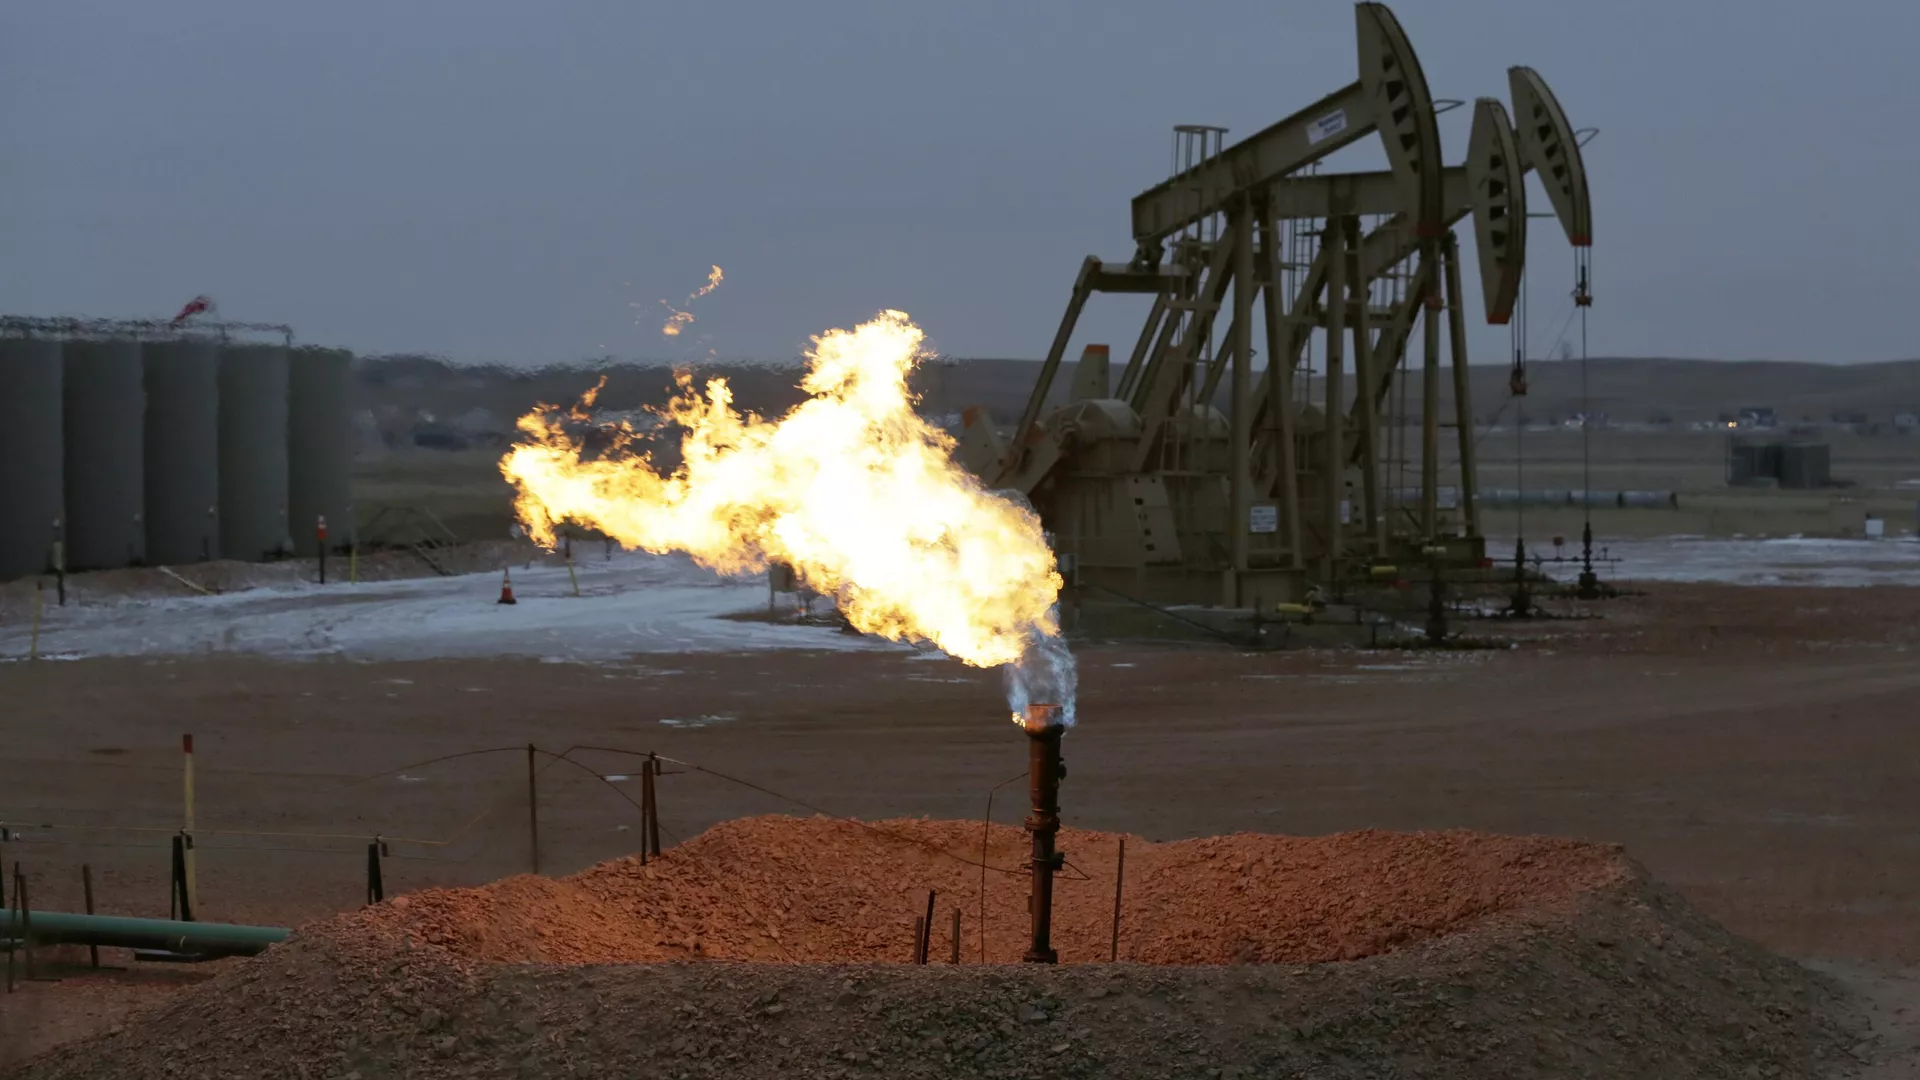 US Energy Industry Leaking Methane Responsible for $9.3 Billion Worth of Climate Damage